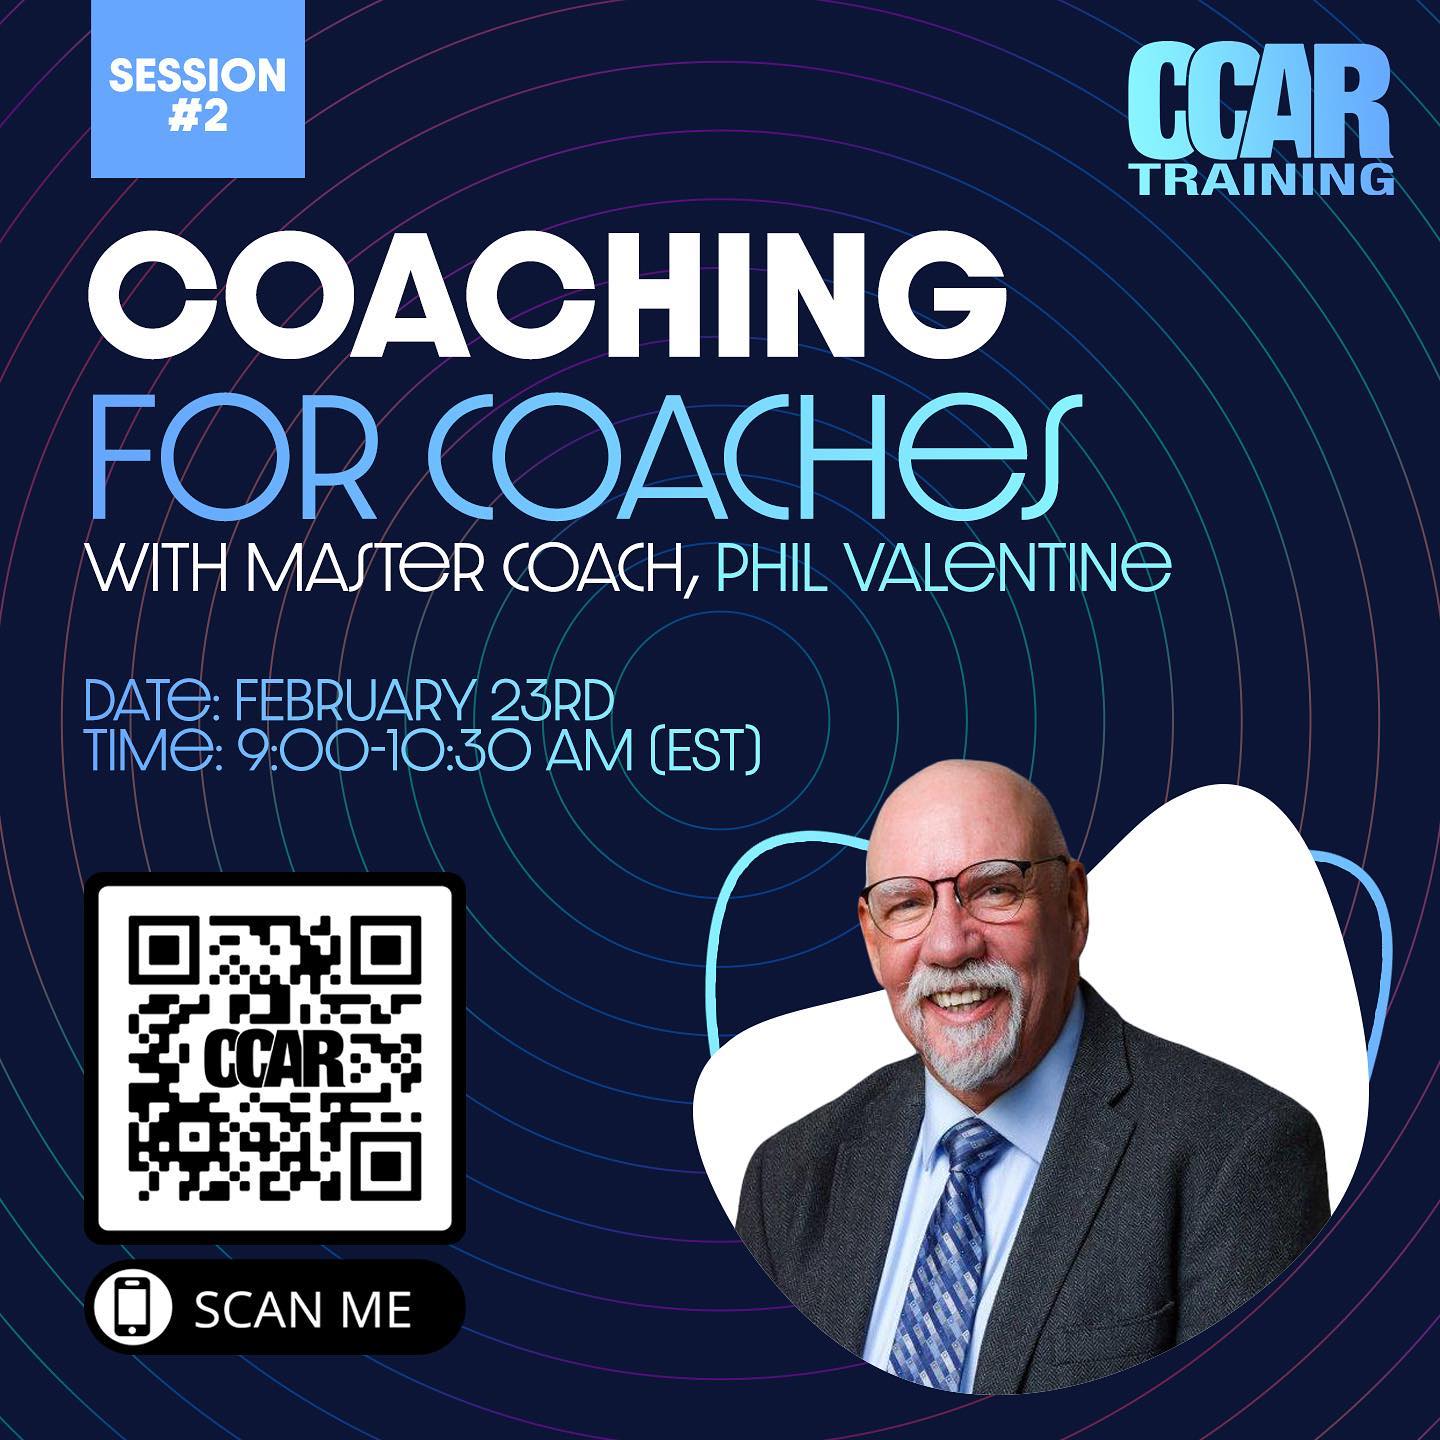 Good morning everyone! Coaching for Coaches begins in less than an hour!!!

Join Zoom Meeting
https://us02web.zoom.us/j/82903538237?pwd=TnlmU1VNNHNUR0tGaDlFWGJZU2Vkdz09
 
Meeting ID: 829 0353 8237
Passcode: 153665

#recoveryispossible #recoverycoaches #recoverymatters #addictionrecovery #peersupport #onlinelearning #coachervision #onlineclassroom #virtuallearning #communitysupport #ccar #rcp #iarcp #webinar